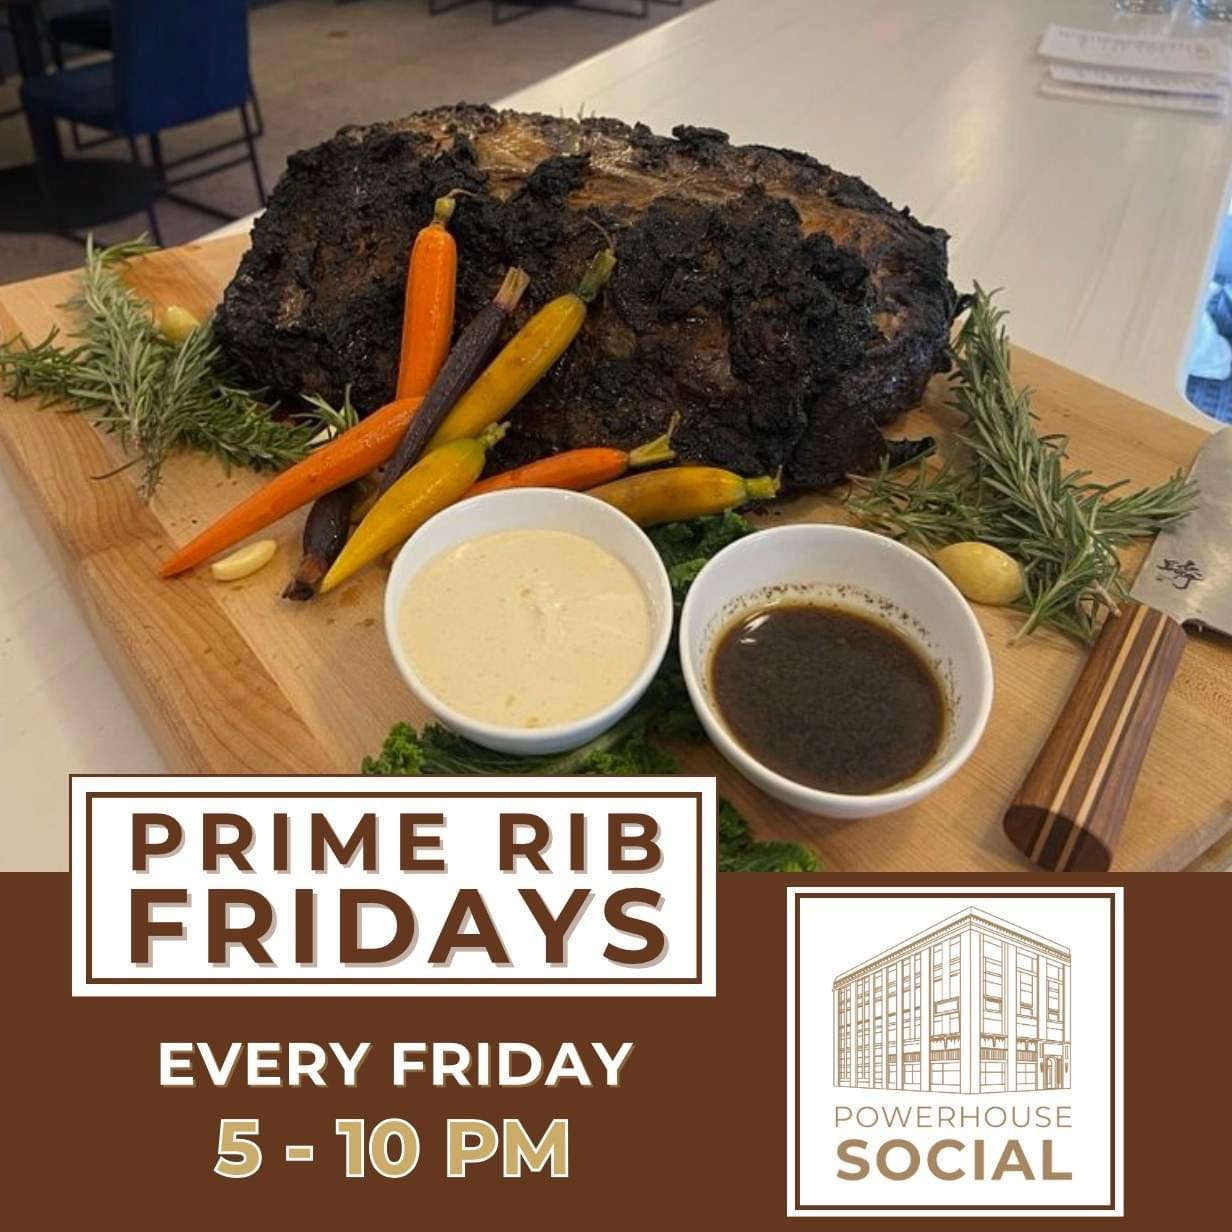 Join us tonight at Powerhouse Social for our 🌟 signature prime rib night! 🥩📅 Join us tonight from 5-10 PM and indulge in perfectly cooked prime rib, a culinary bliss you won't forget! 🍽️

#scottsbluff #scottsbluffnebraska #scottsbluffne #nebraska